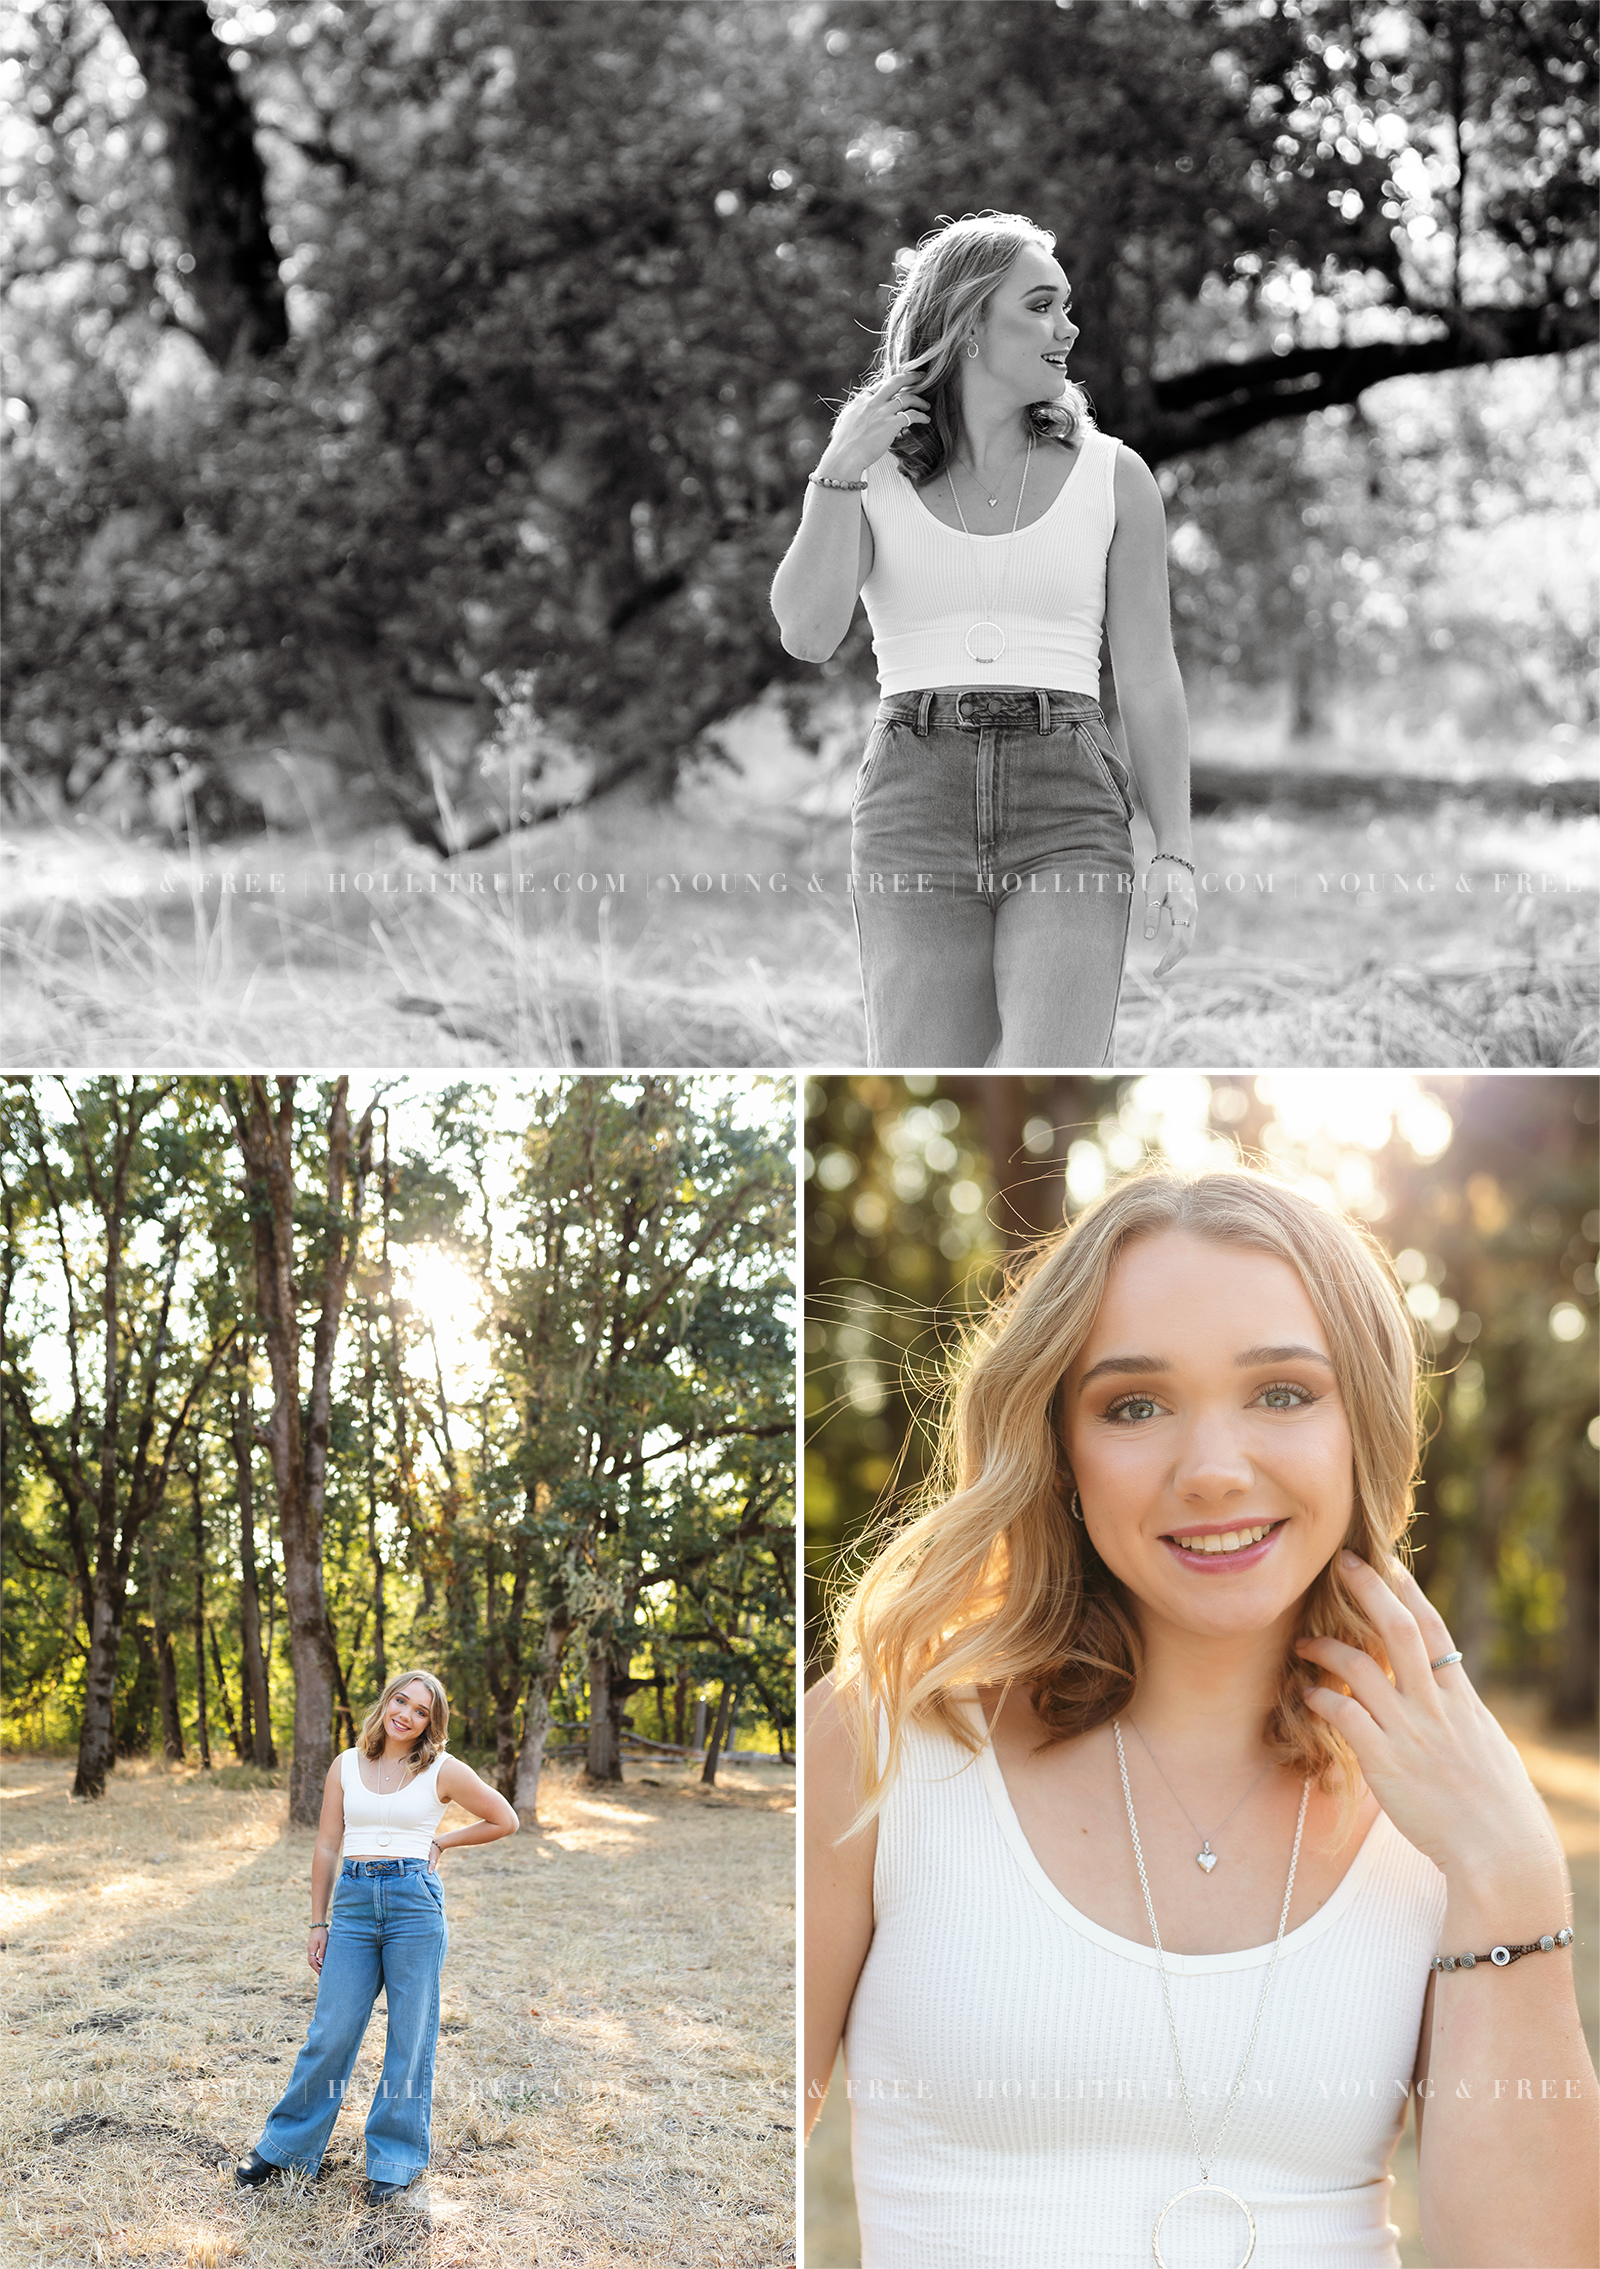 Senior pictures in a park at sunset with Eugene Senior Photographer, Holli True